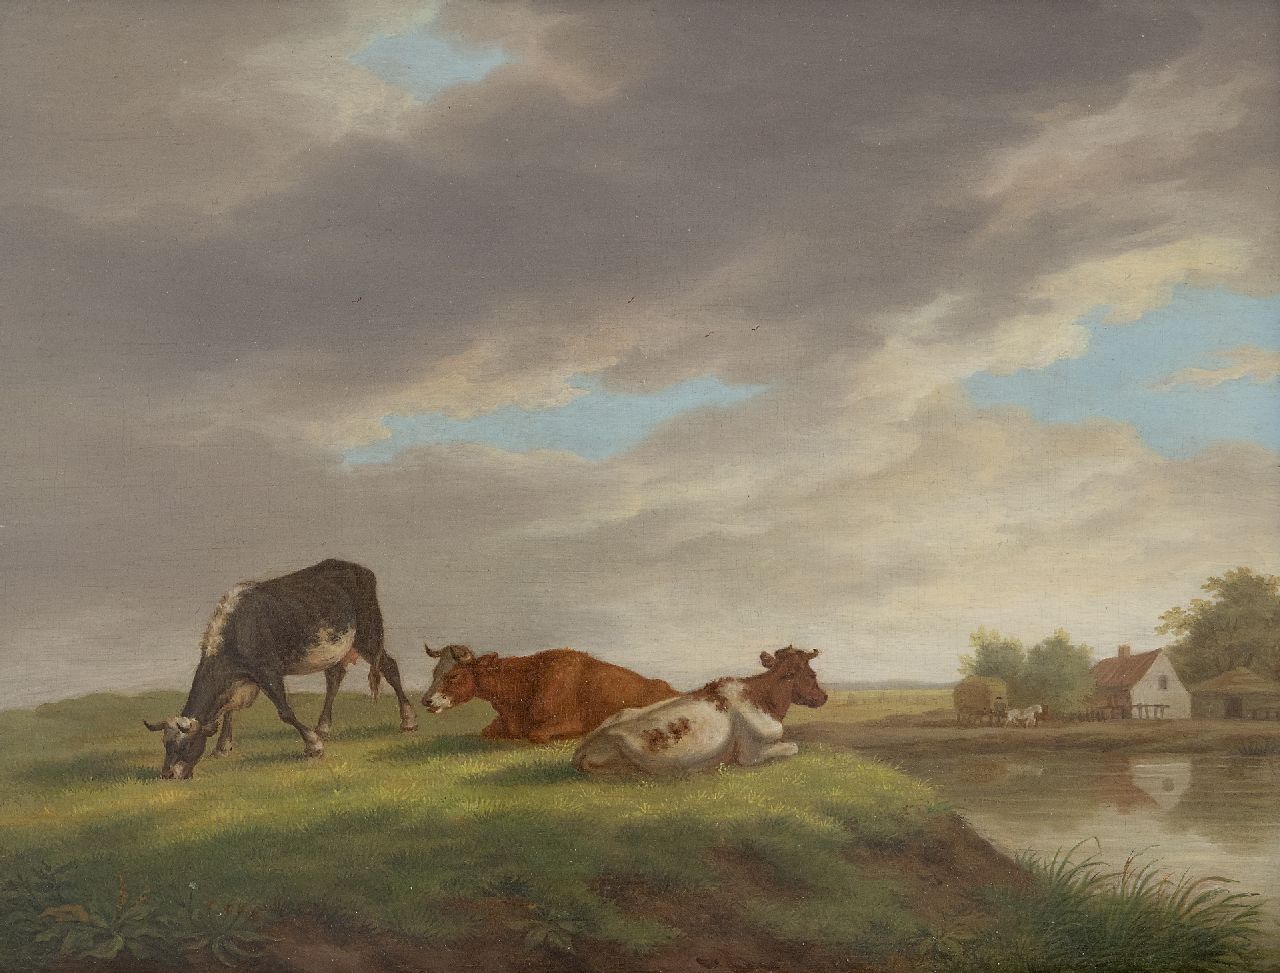 Burgh H.A. van der | Hendrik Adam van der Burgh | Paintings offered for sale | Cows in a landscape with a farm, oil on panel 20.4 x 26.3 cm, signed l.l. and painted 1821